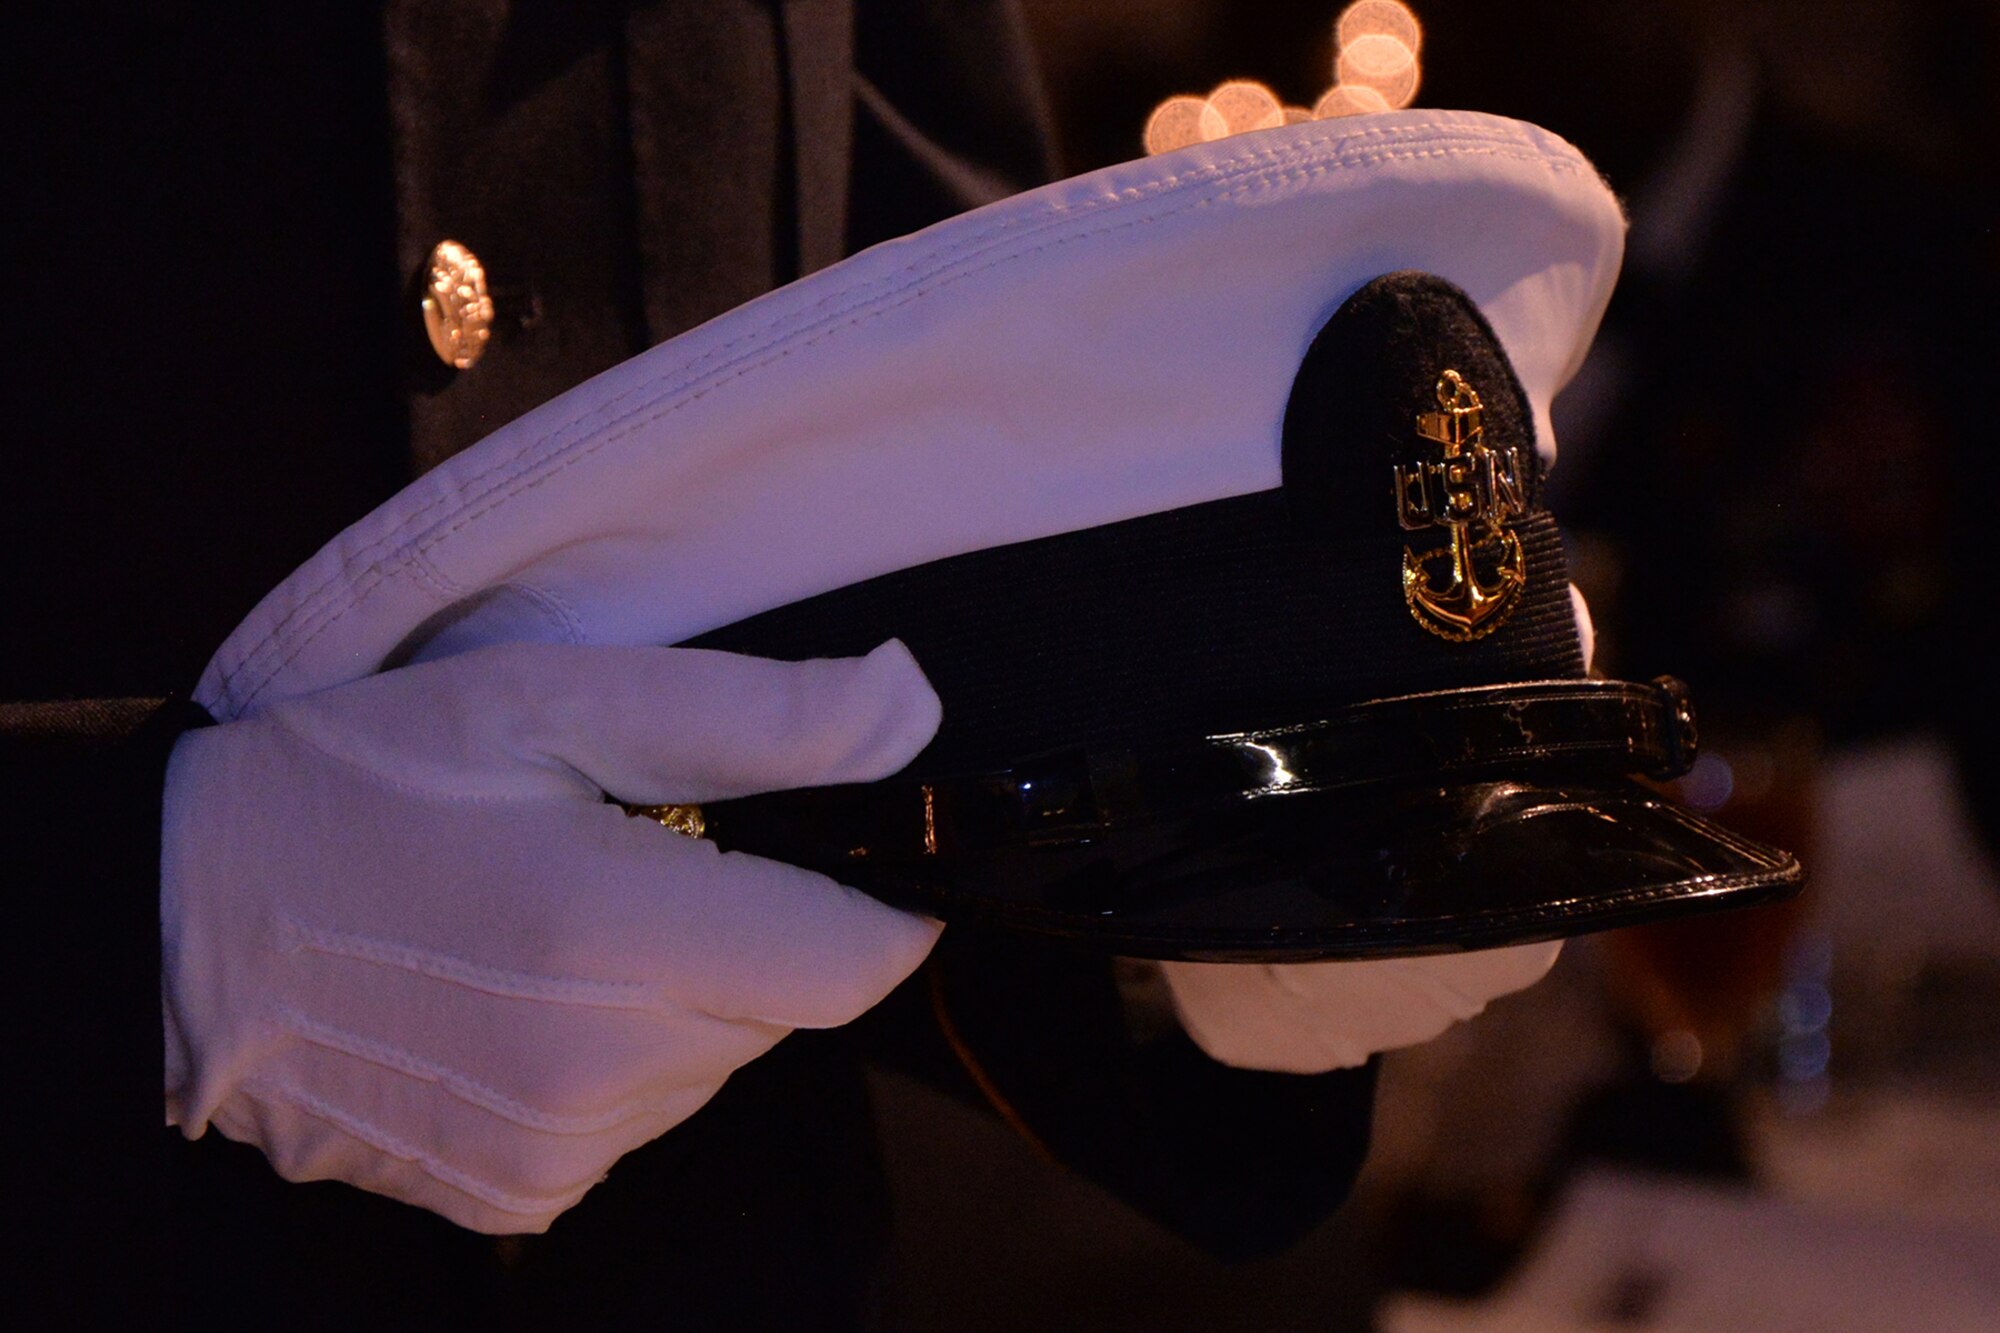 An Honor Guard member places a U.S. Navy hat on the POW/MIA “Missing Man” table during the 344th Military Intelligence Battalion Army Ball at the Fort Concho Stables in San Angelo, Texas, June 10, 2016.  The table is set in remembrance of service members who are prisoners of war or missing in action. (U.S. Air Force photo by Airman 1st Class Randall Moose/Released)